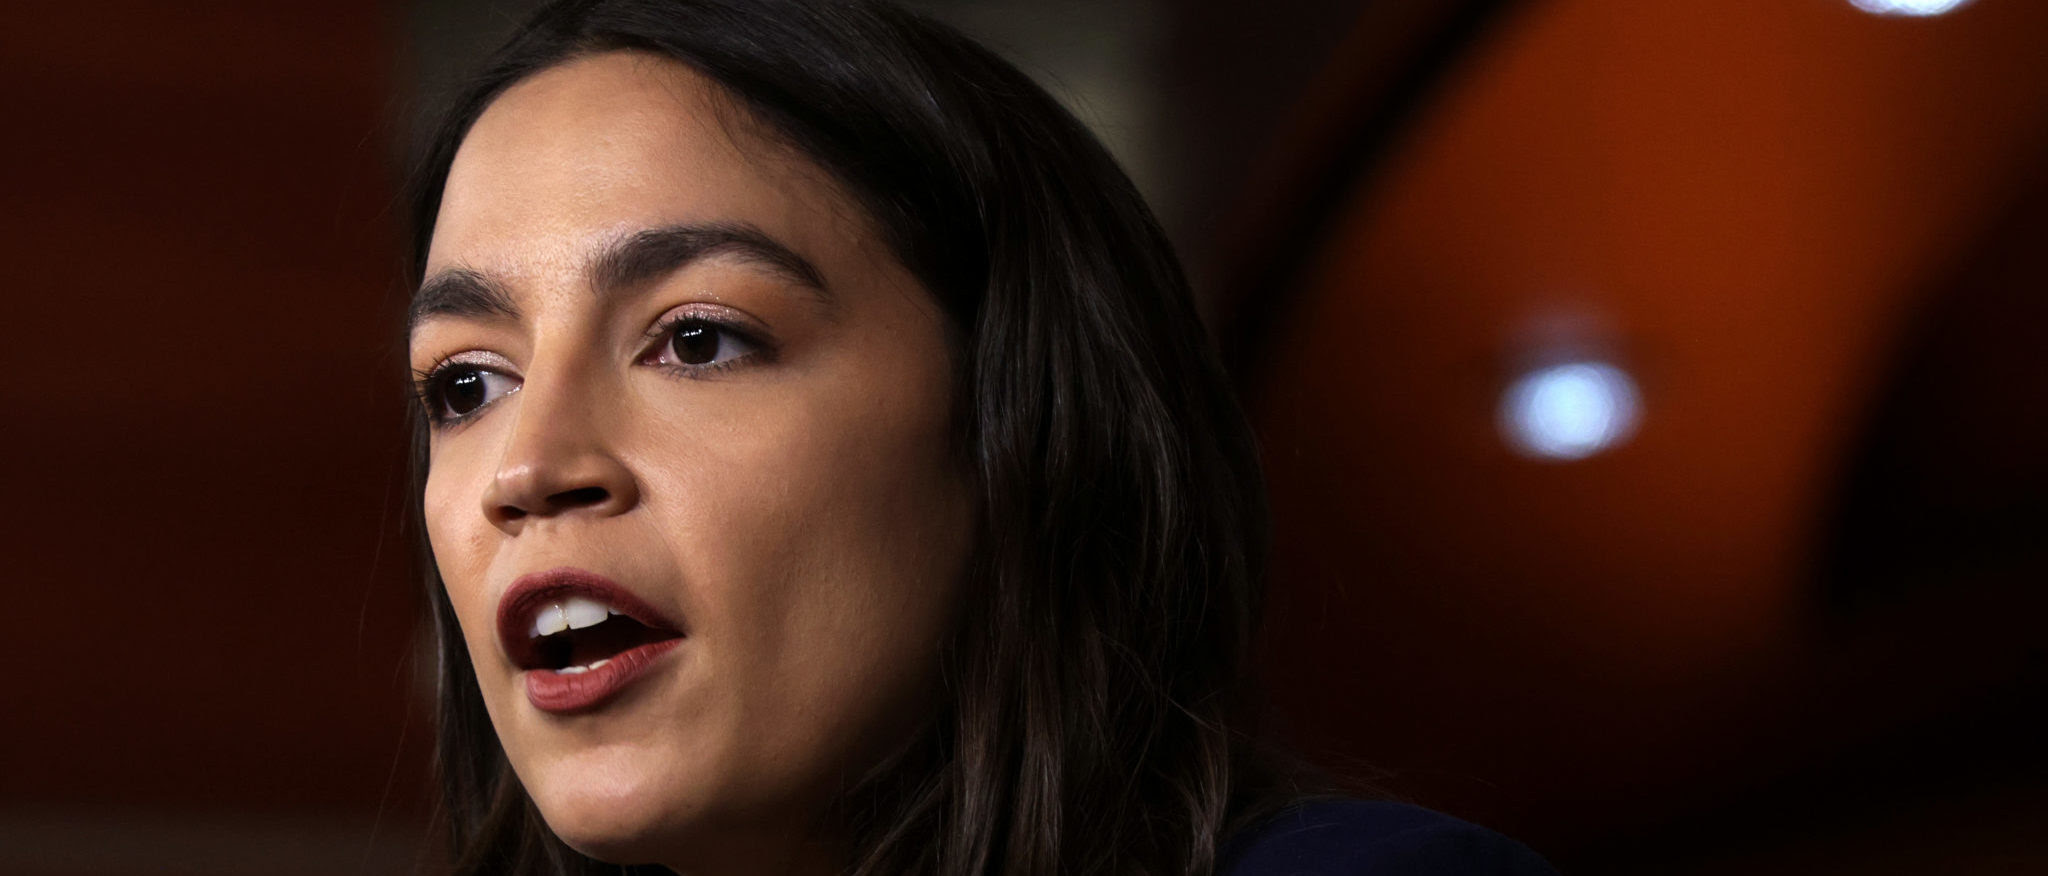 Even AOC Can Read The Writing On The Wall For Democrats In 2022